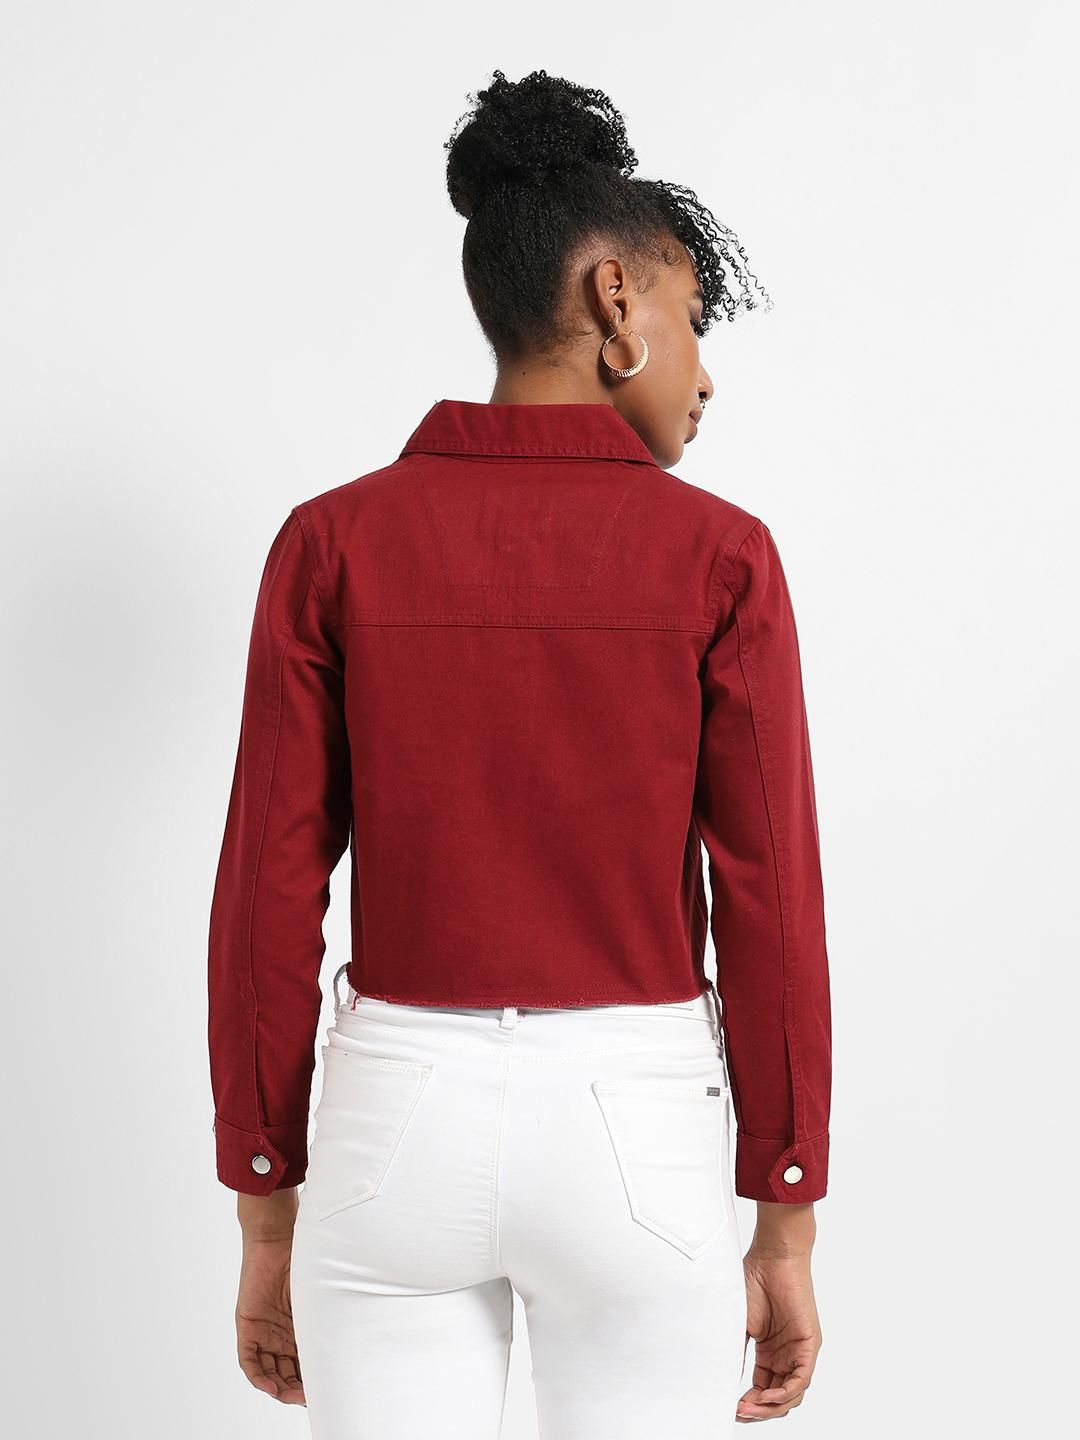 Campus Sutra Women's Cropped Jacket With Flap Pocket